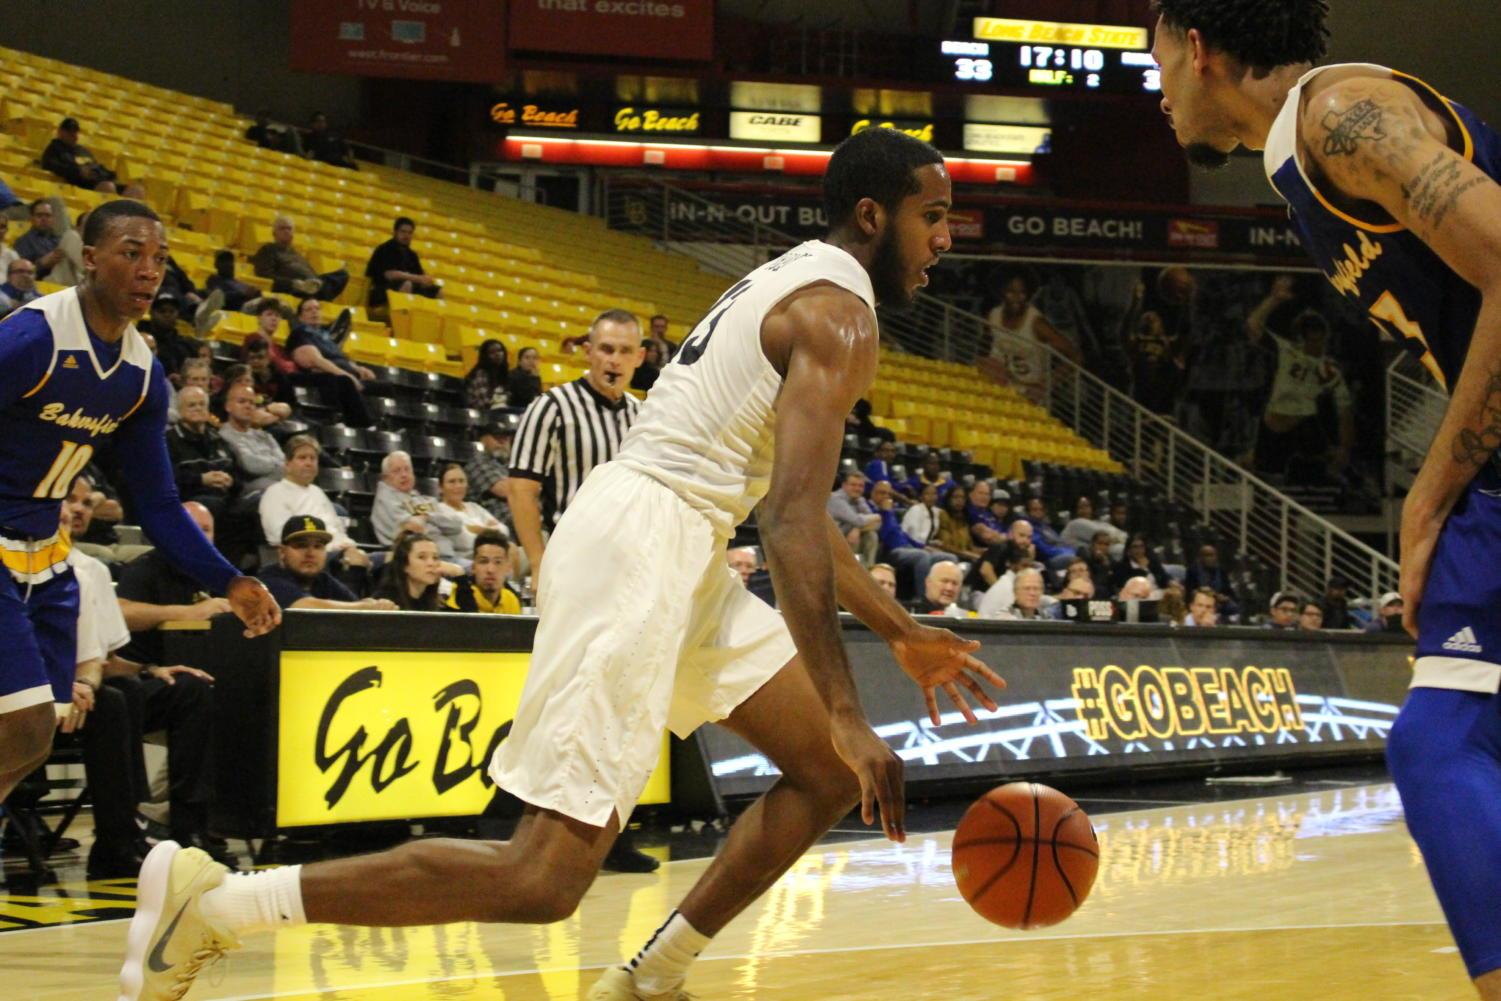 Long Beach State senior Barry Ogalue drive in the paint in Monday's game against CSU Bakersfield at the Walter Pyramid.